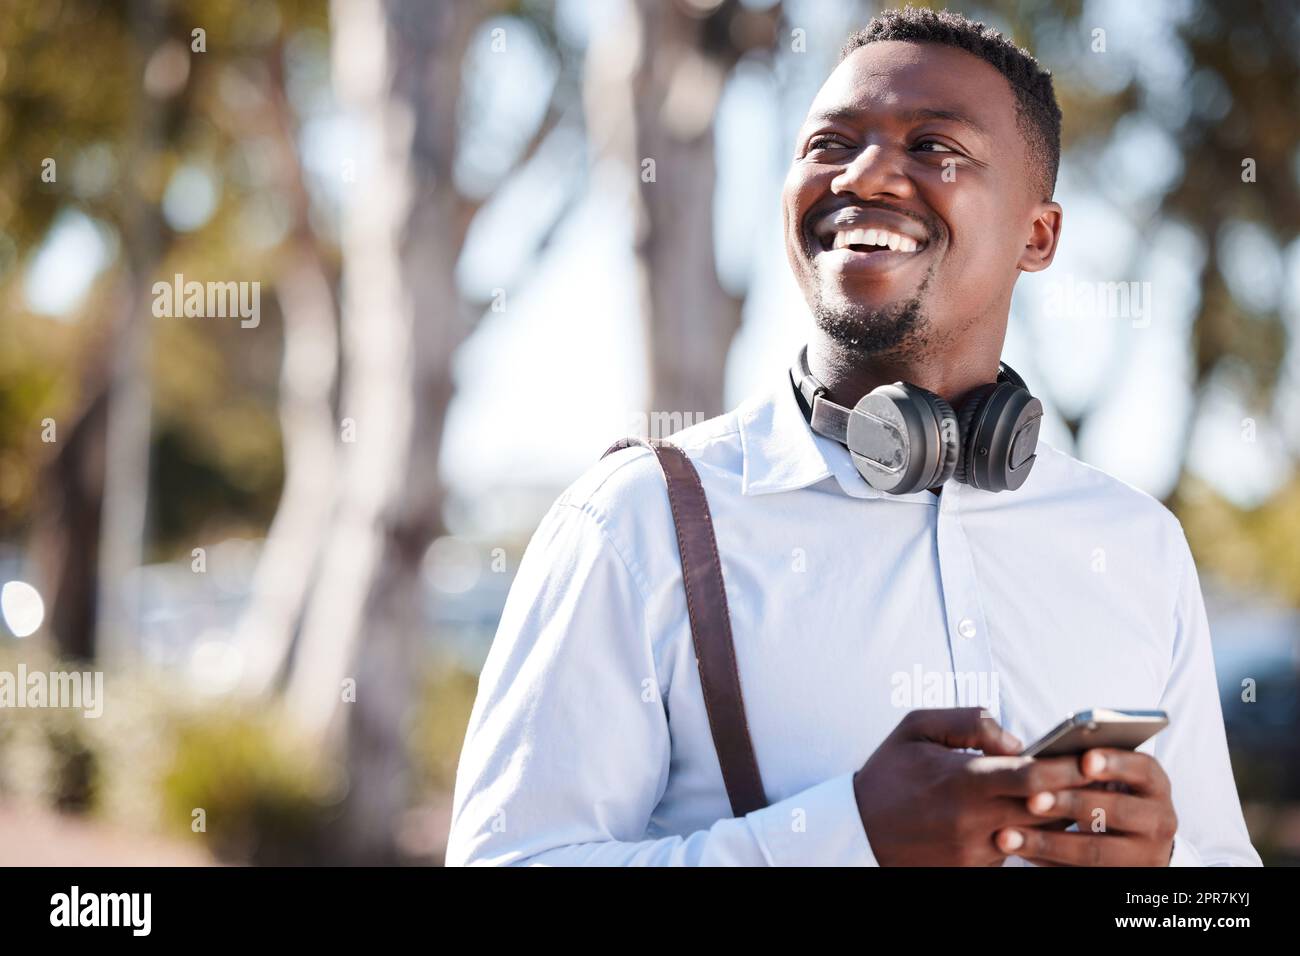 Happy african american businessman wearing headphones and texting on a cellphone while commuting in the city. One young black guy looking thoughtful while using apps and browsing social media online Stock Photo